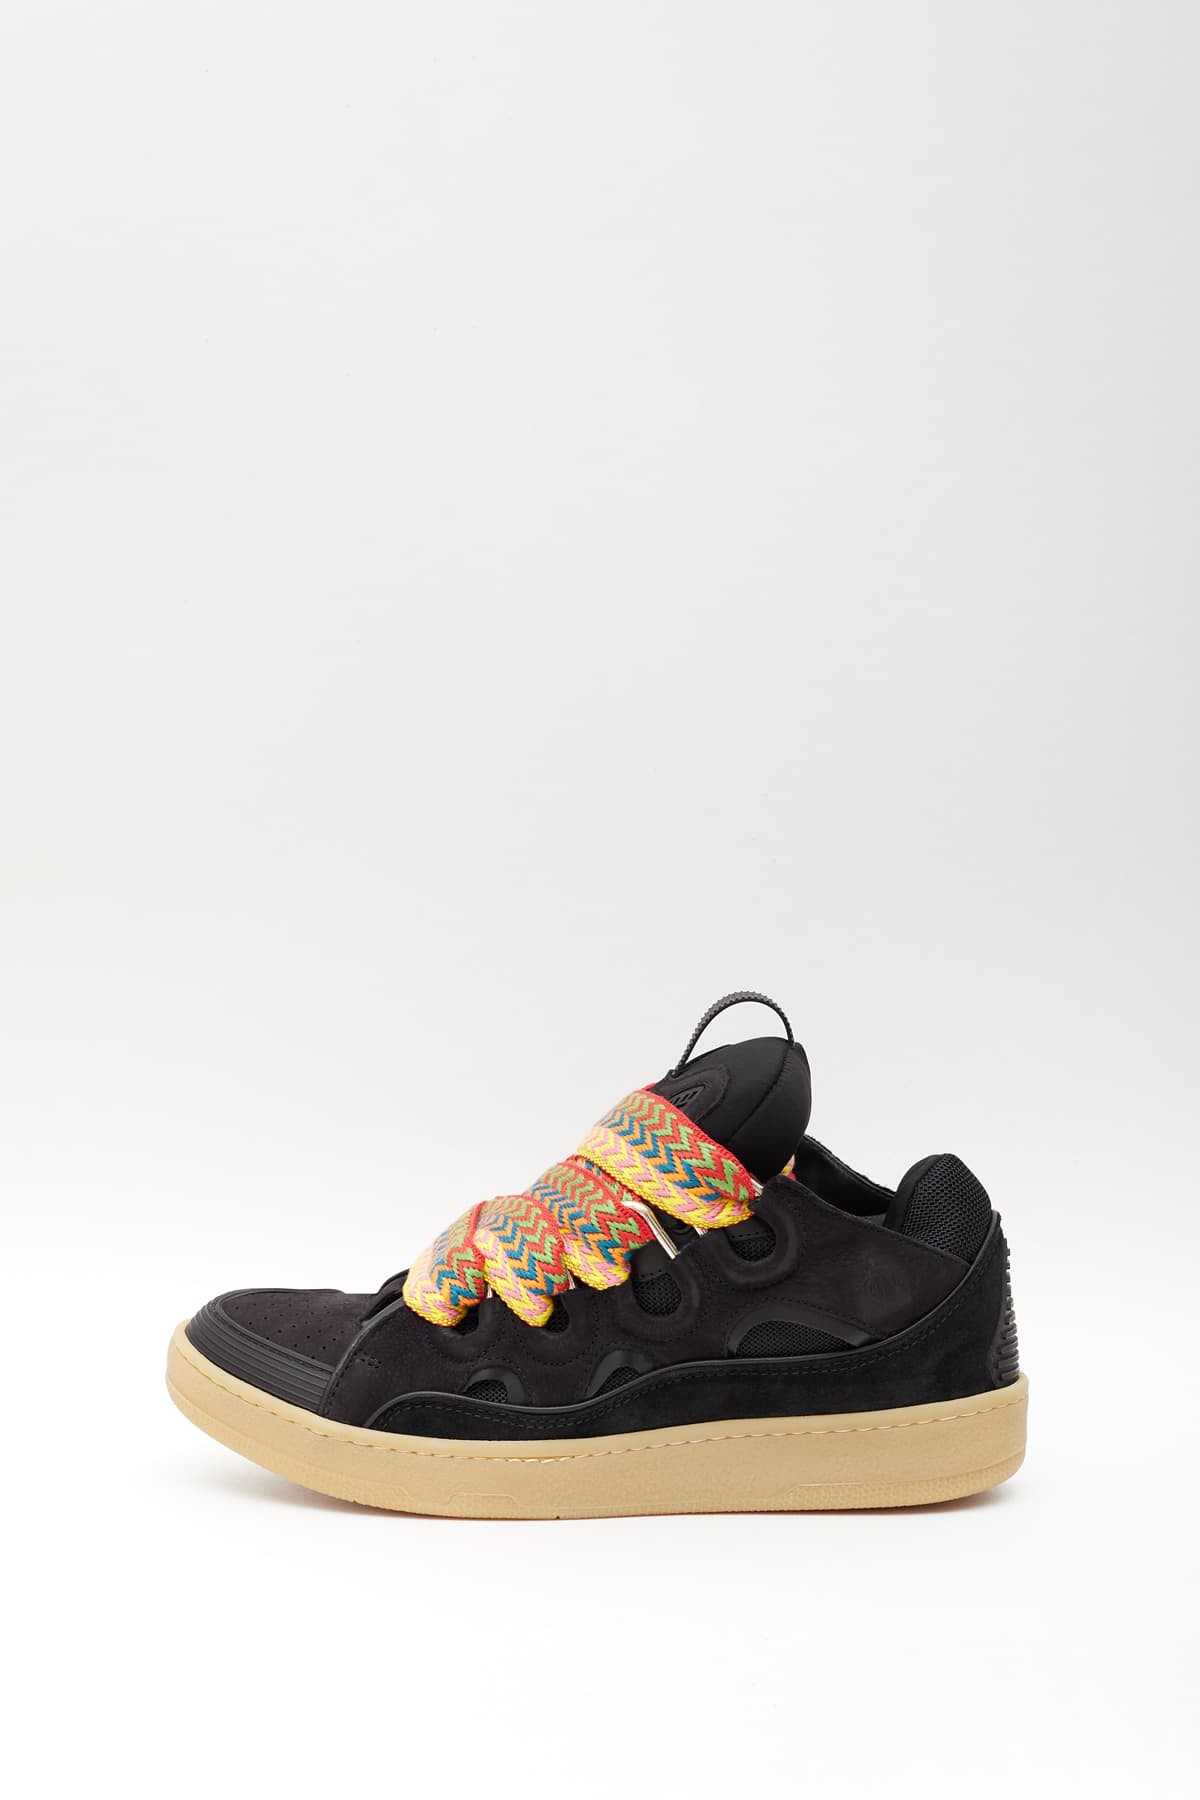 LANVIN BLACK LEATHER CURB SNEAKERS IAMNUE